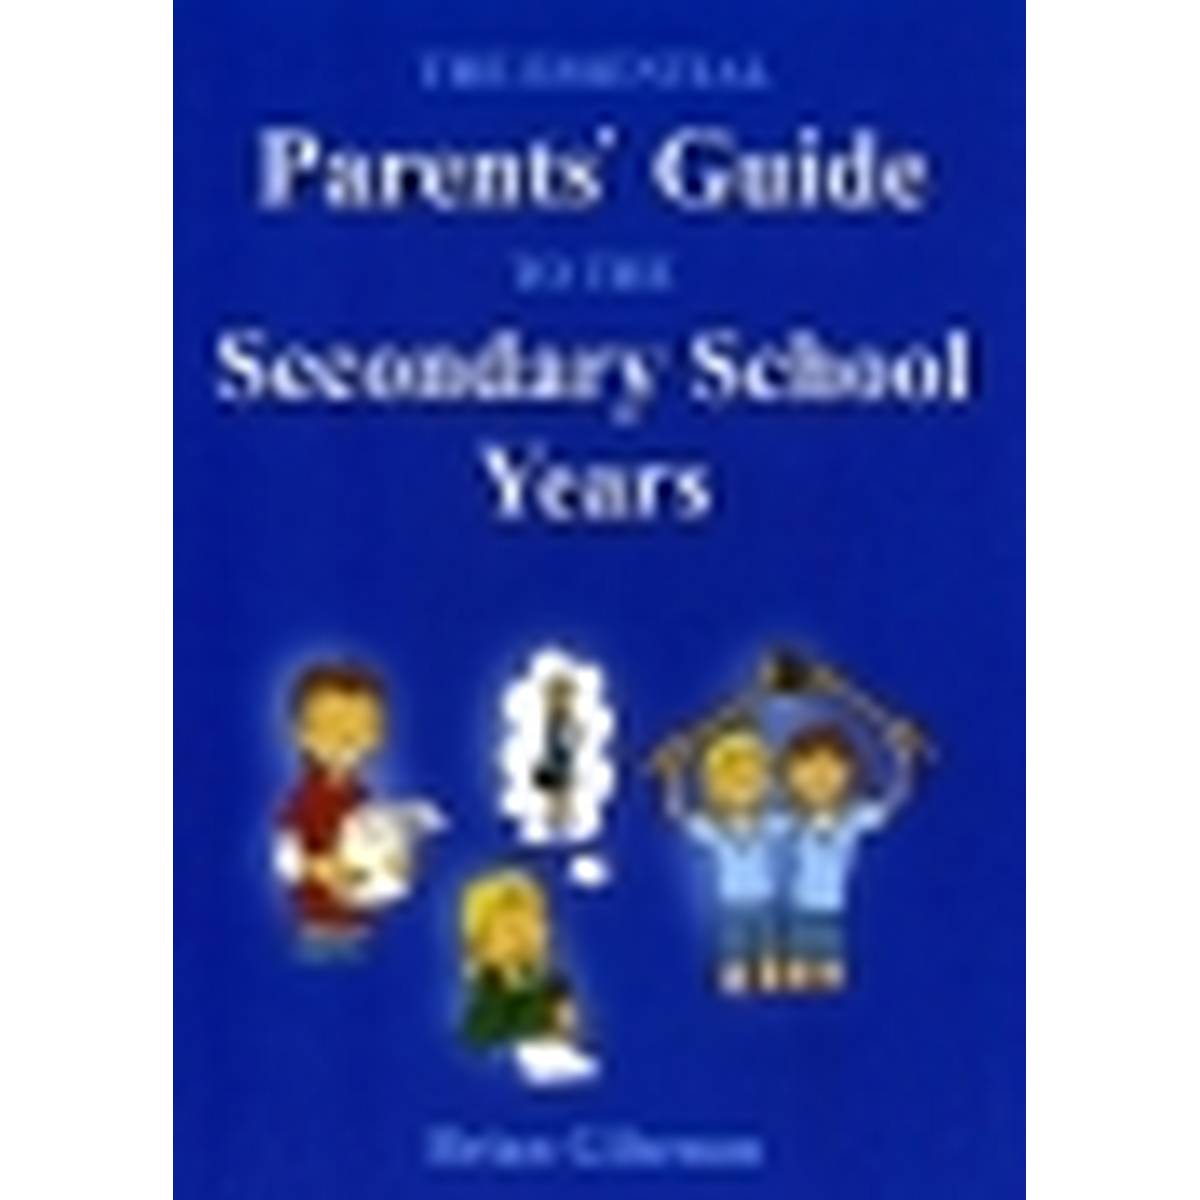 Essential Parents Guide to the Secondary School Yeras